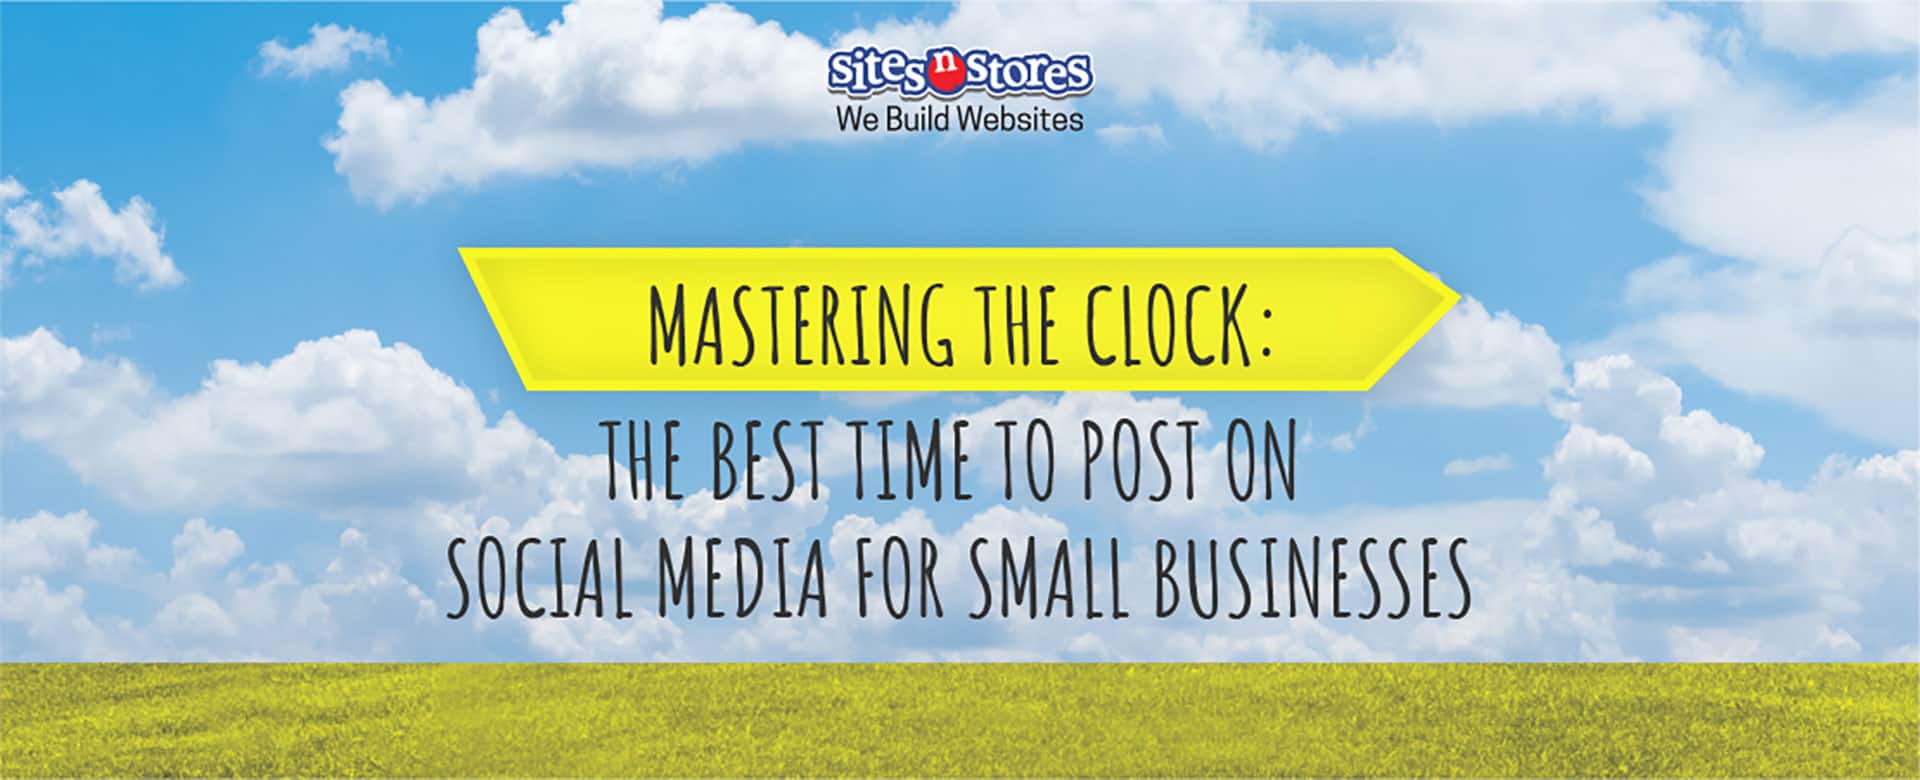 Mastering the Clock: The Best Time to Post on Social Media for Small Businesses